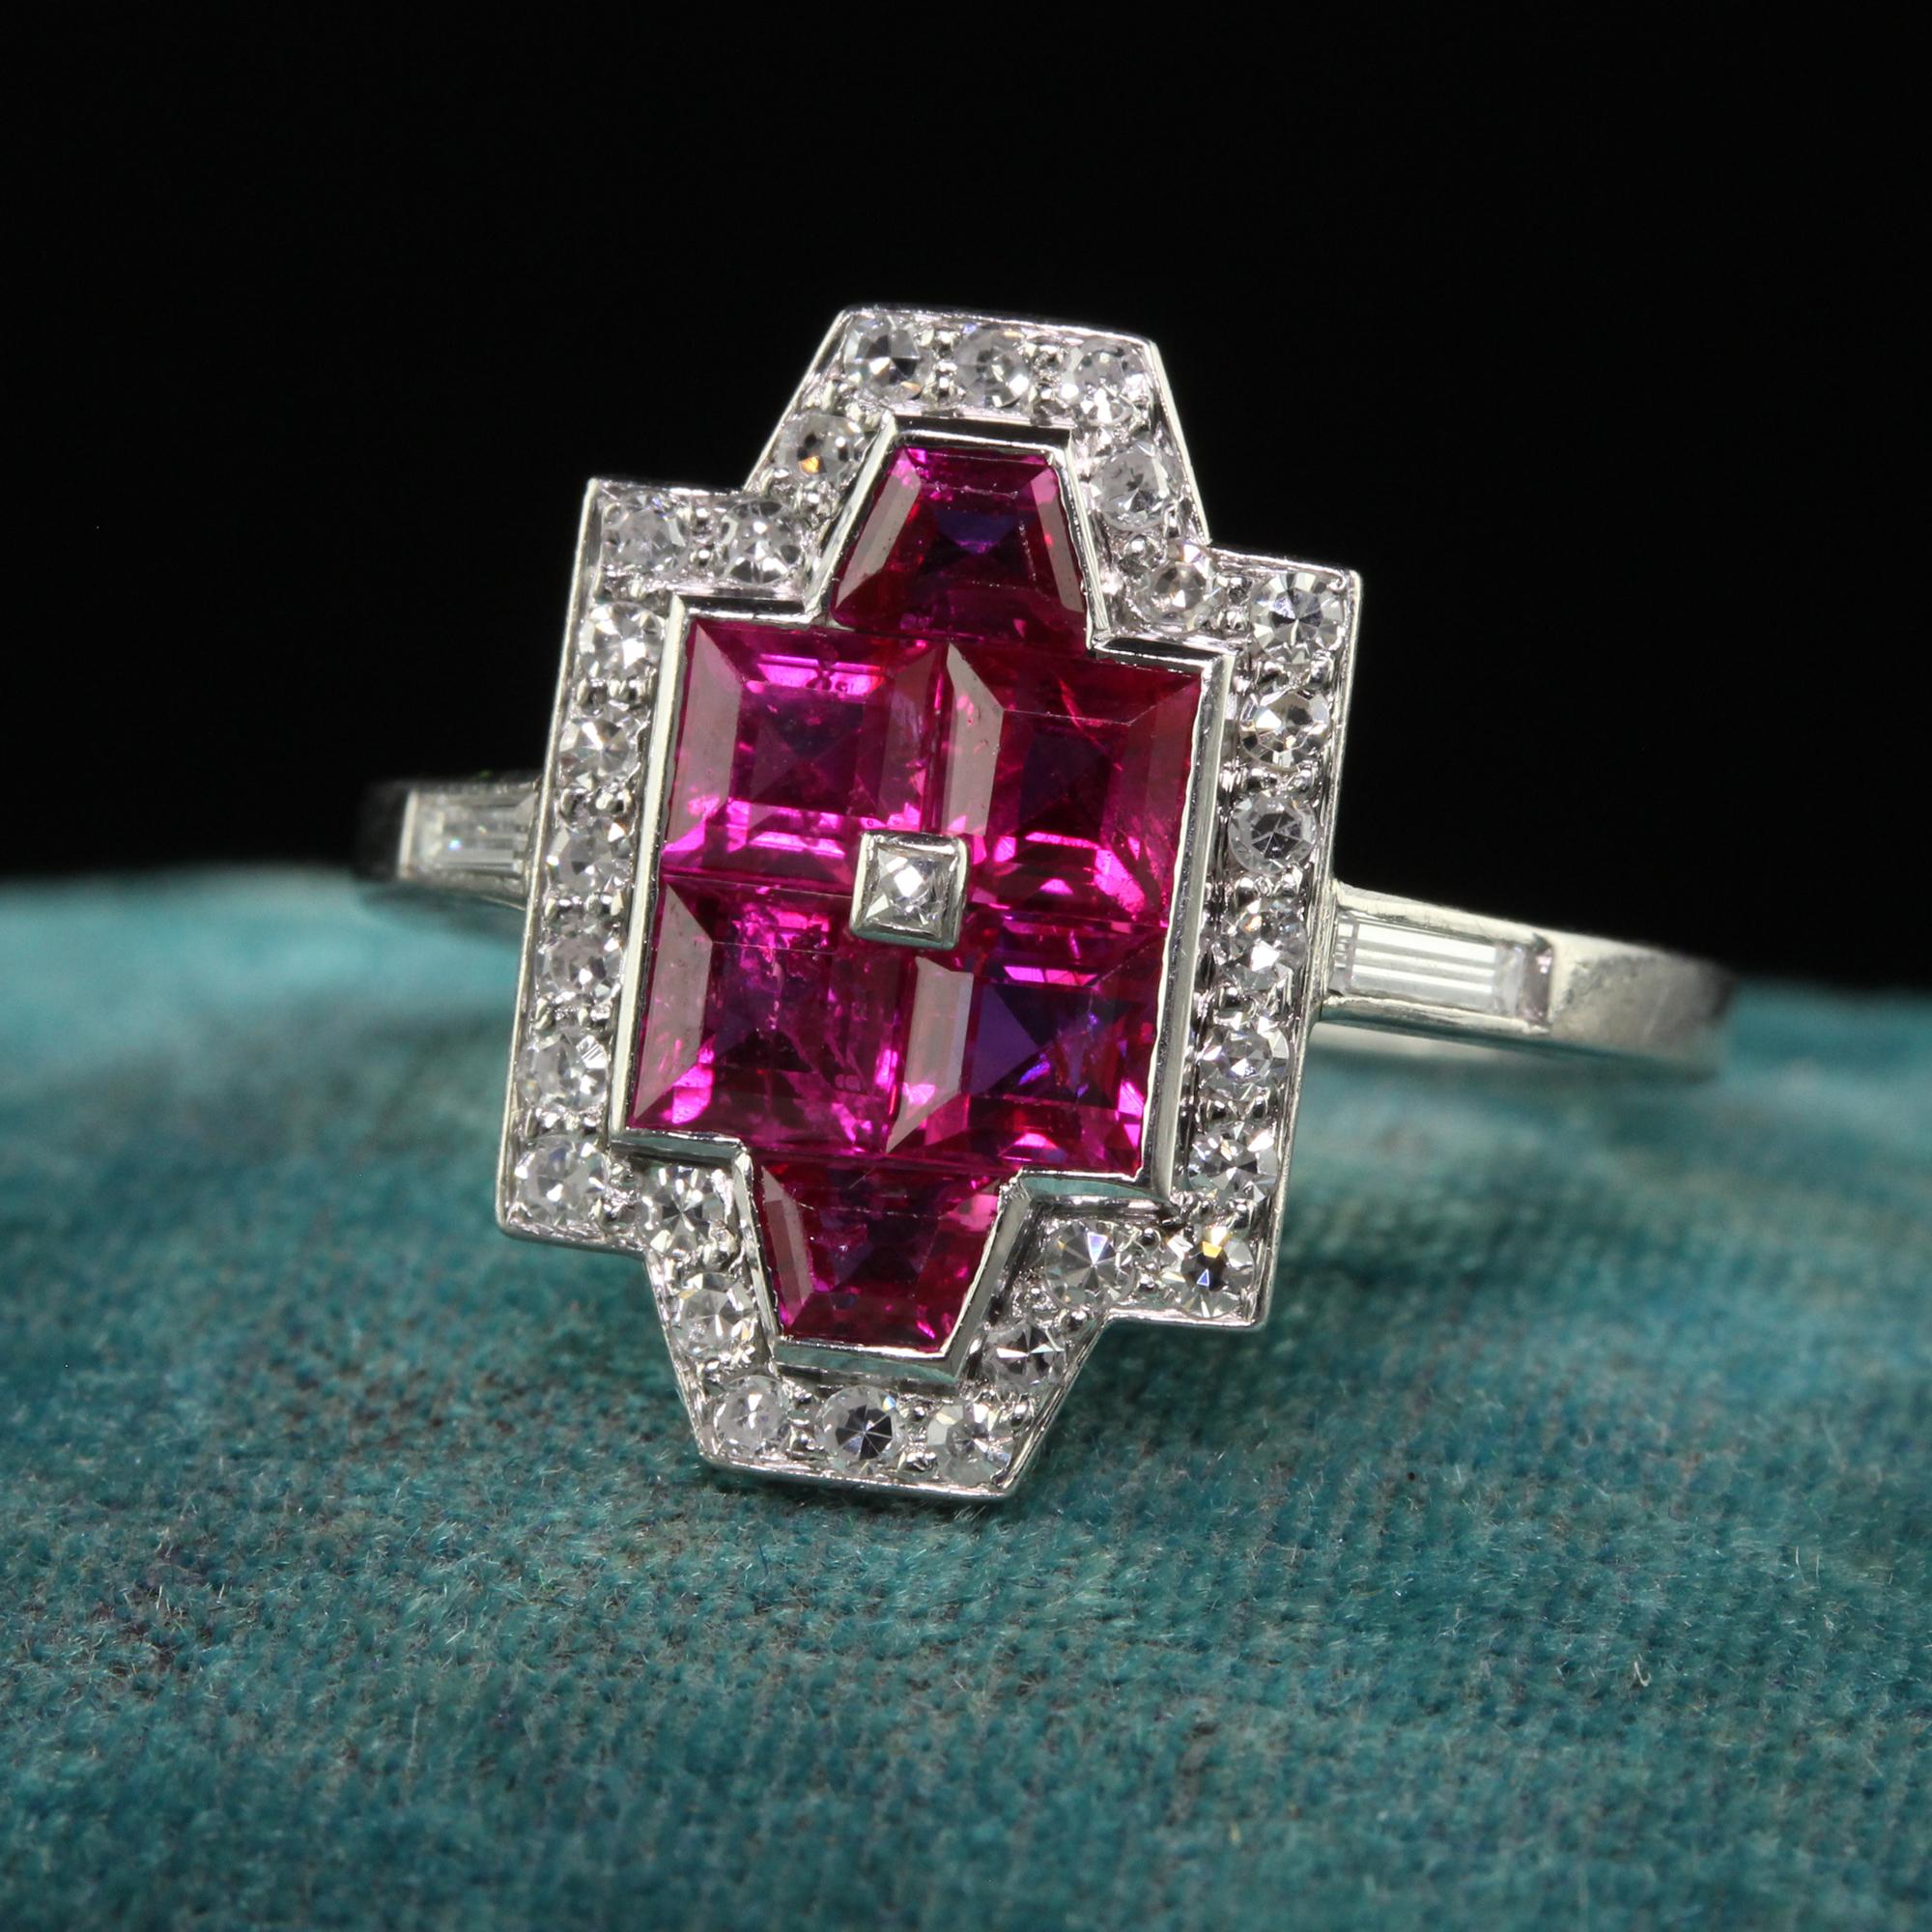 Beautiful Antique Art Deco Cartier Platinum Burmese Ruby and Diamond Ring. This unbelievable Cartier ring is crafted in platinum. The top of the ring holds natural square cut Burmese rubies that has a single cut diamond halo around the border. The